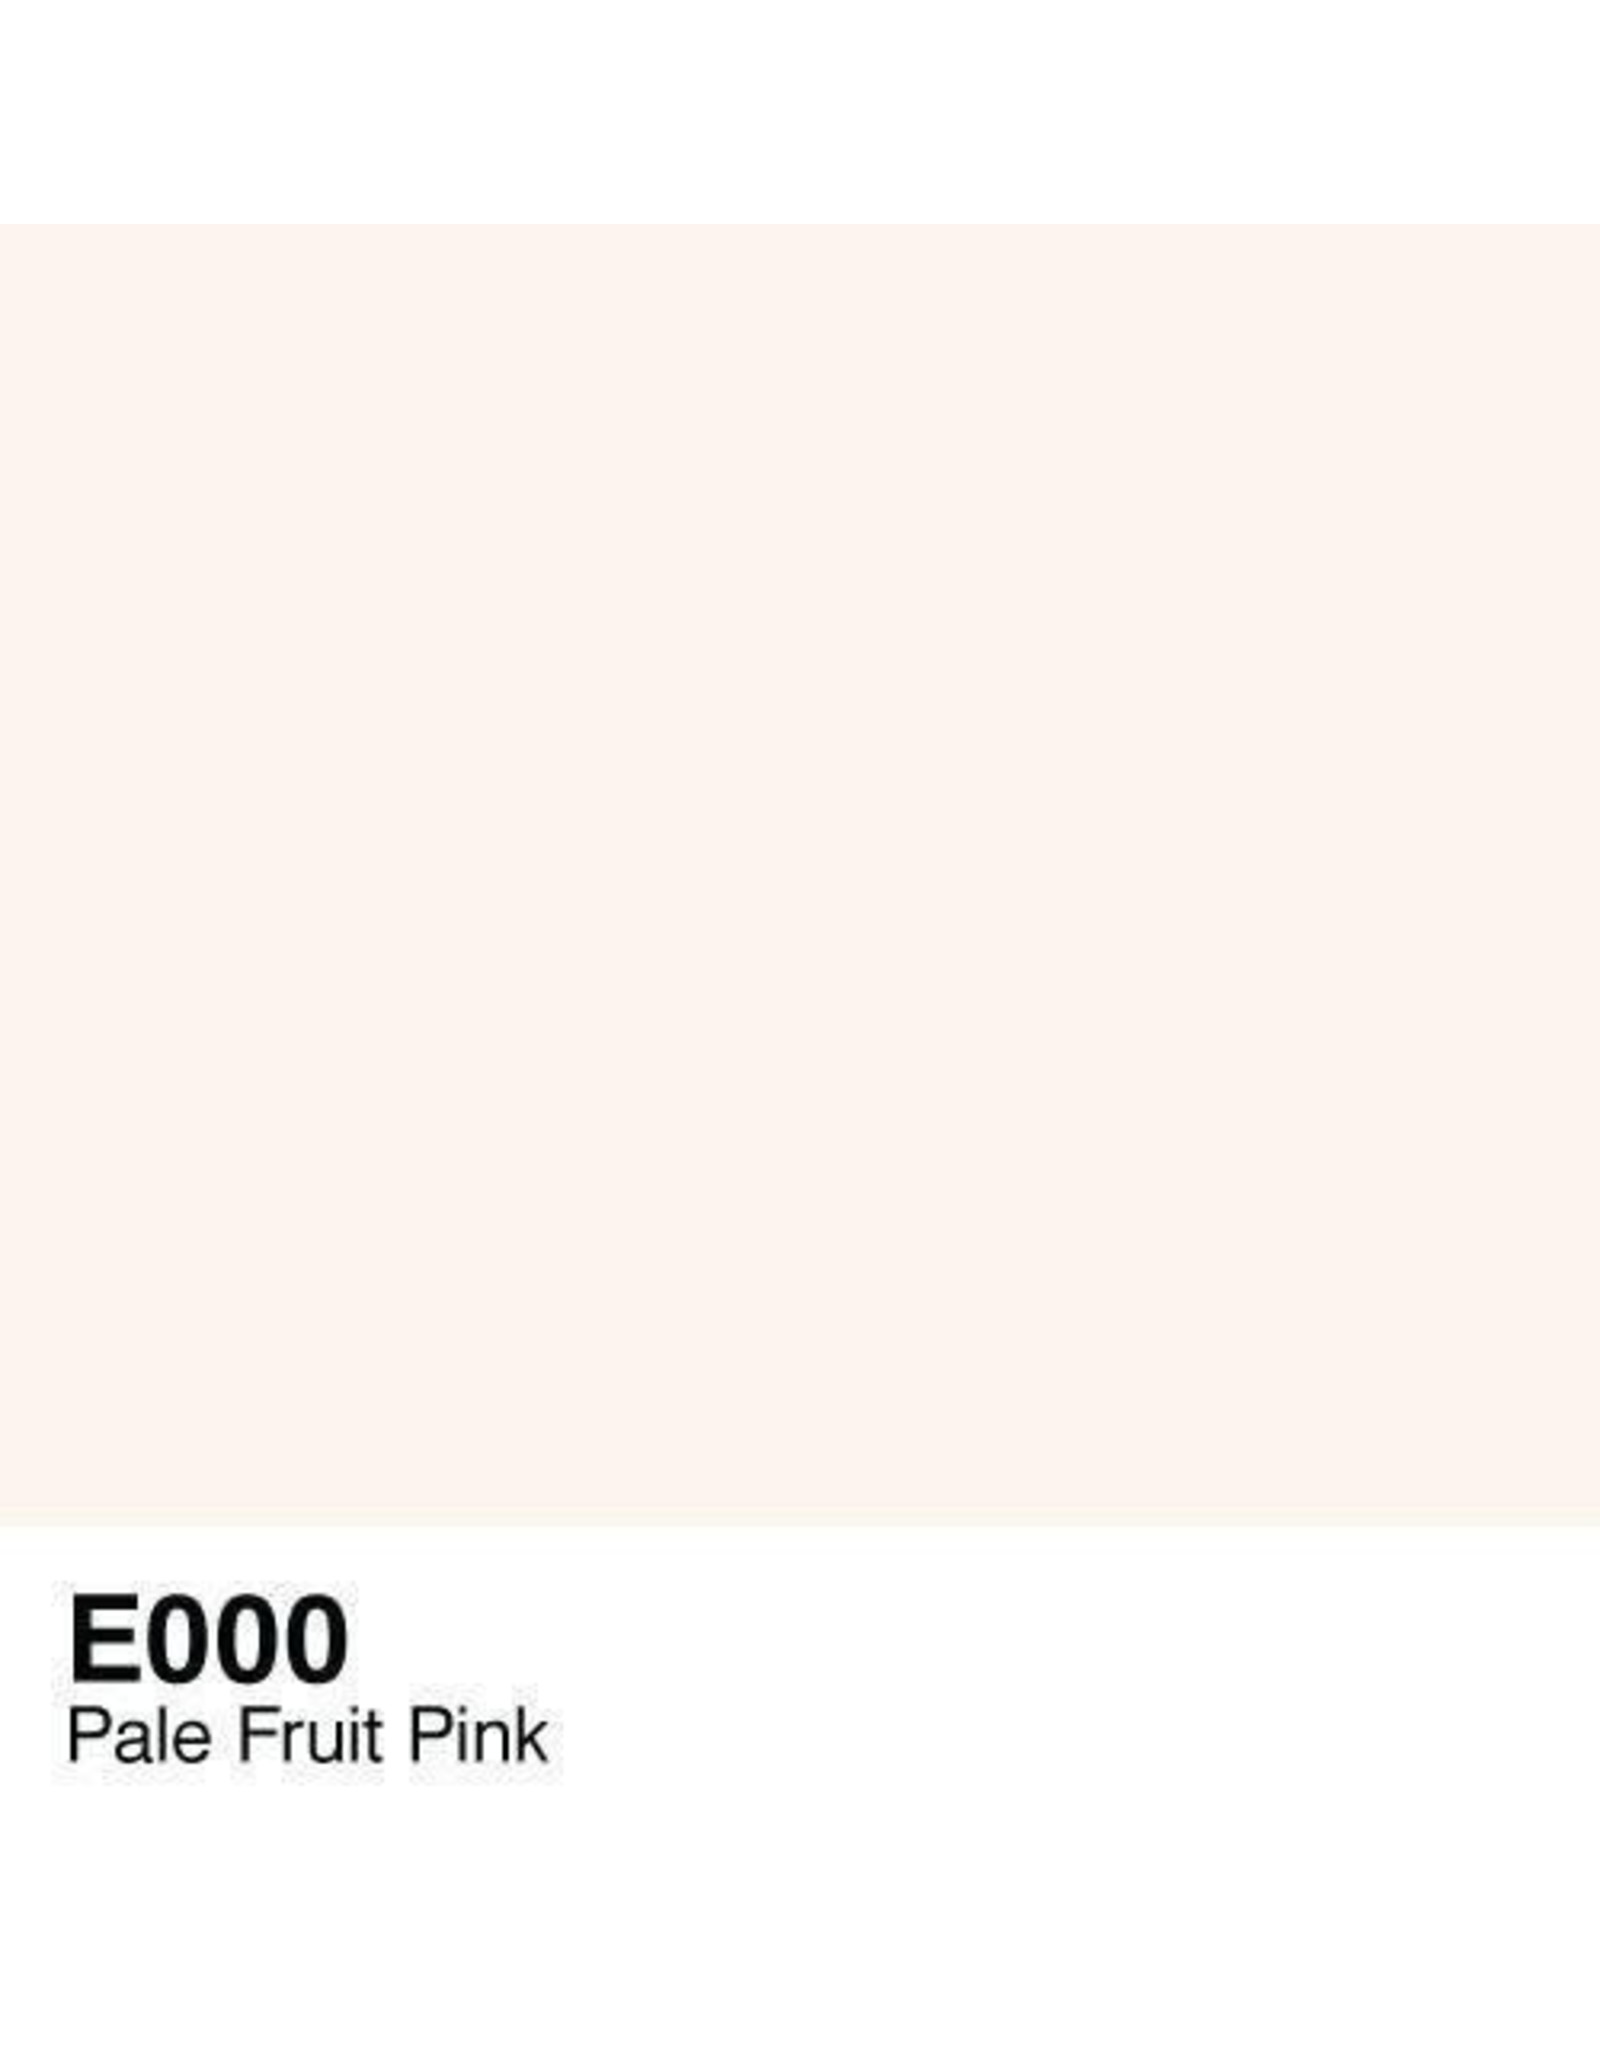 COPIC COPIC E000 PALE FRUIT PINK VARIOUS REFILL